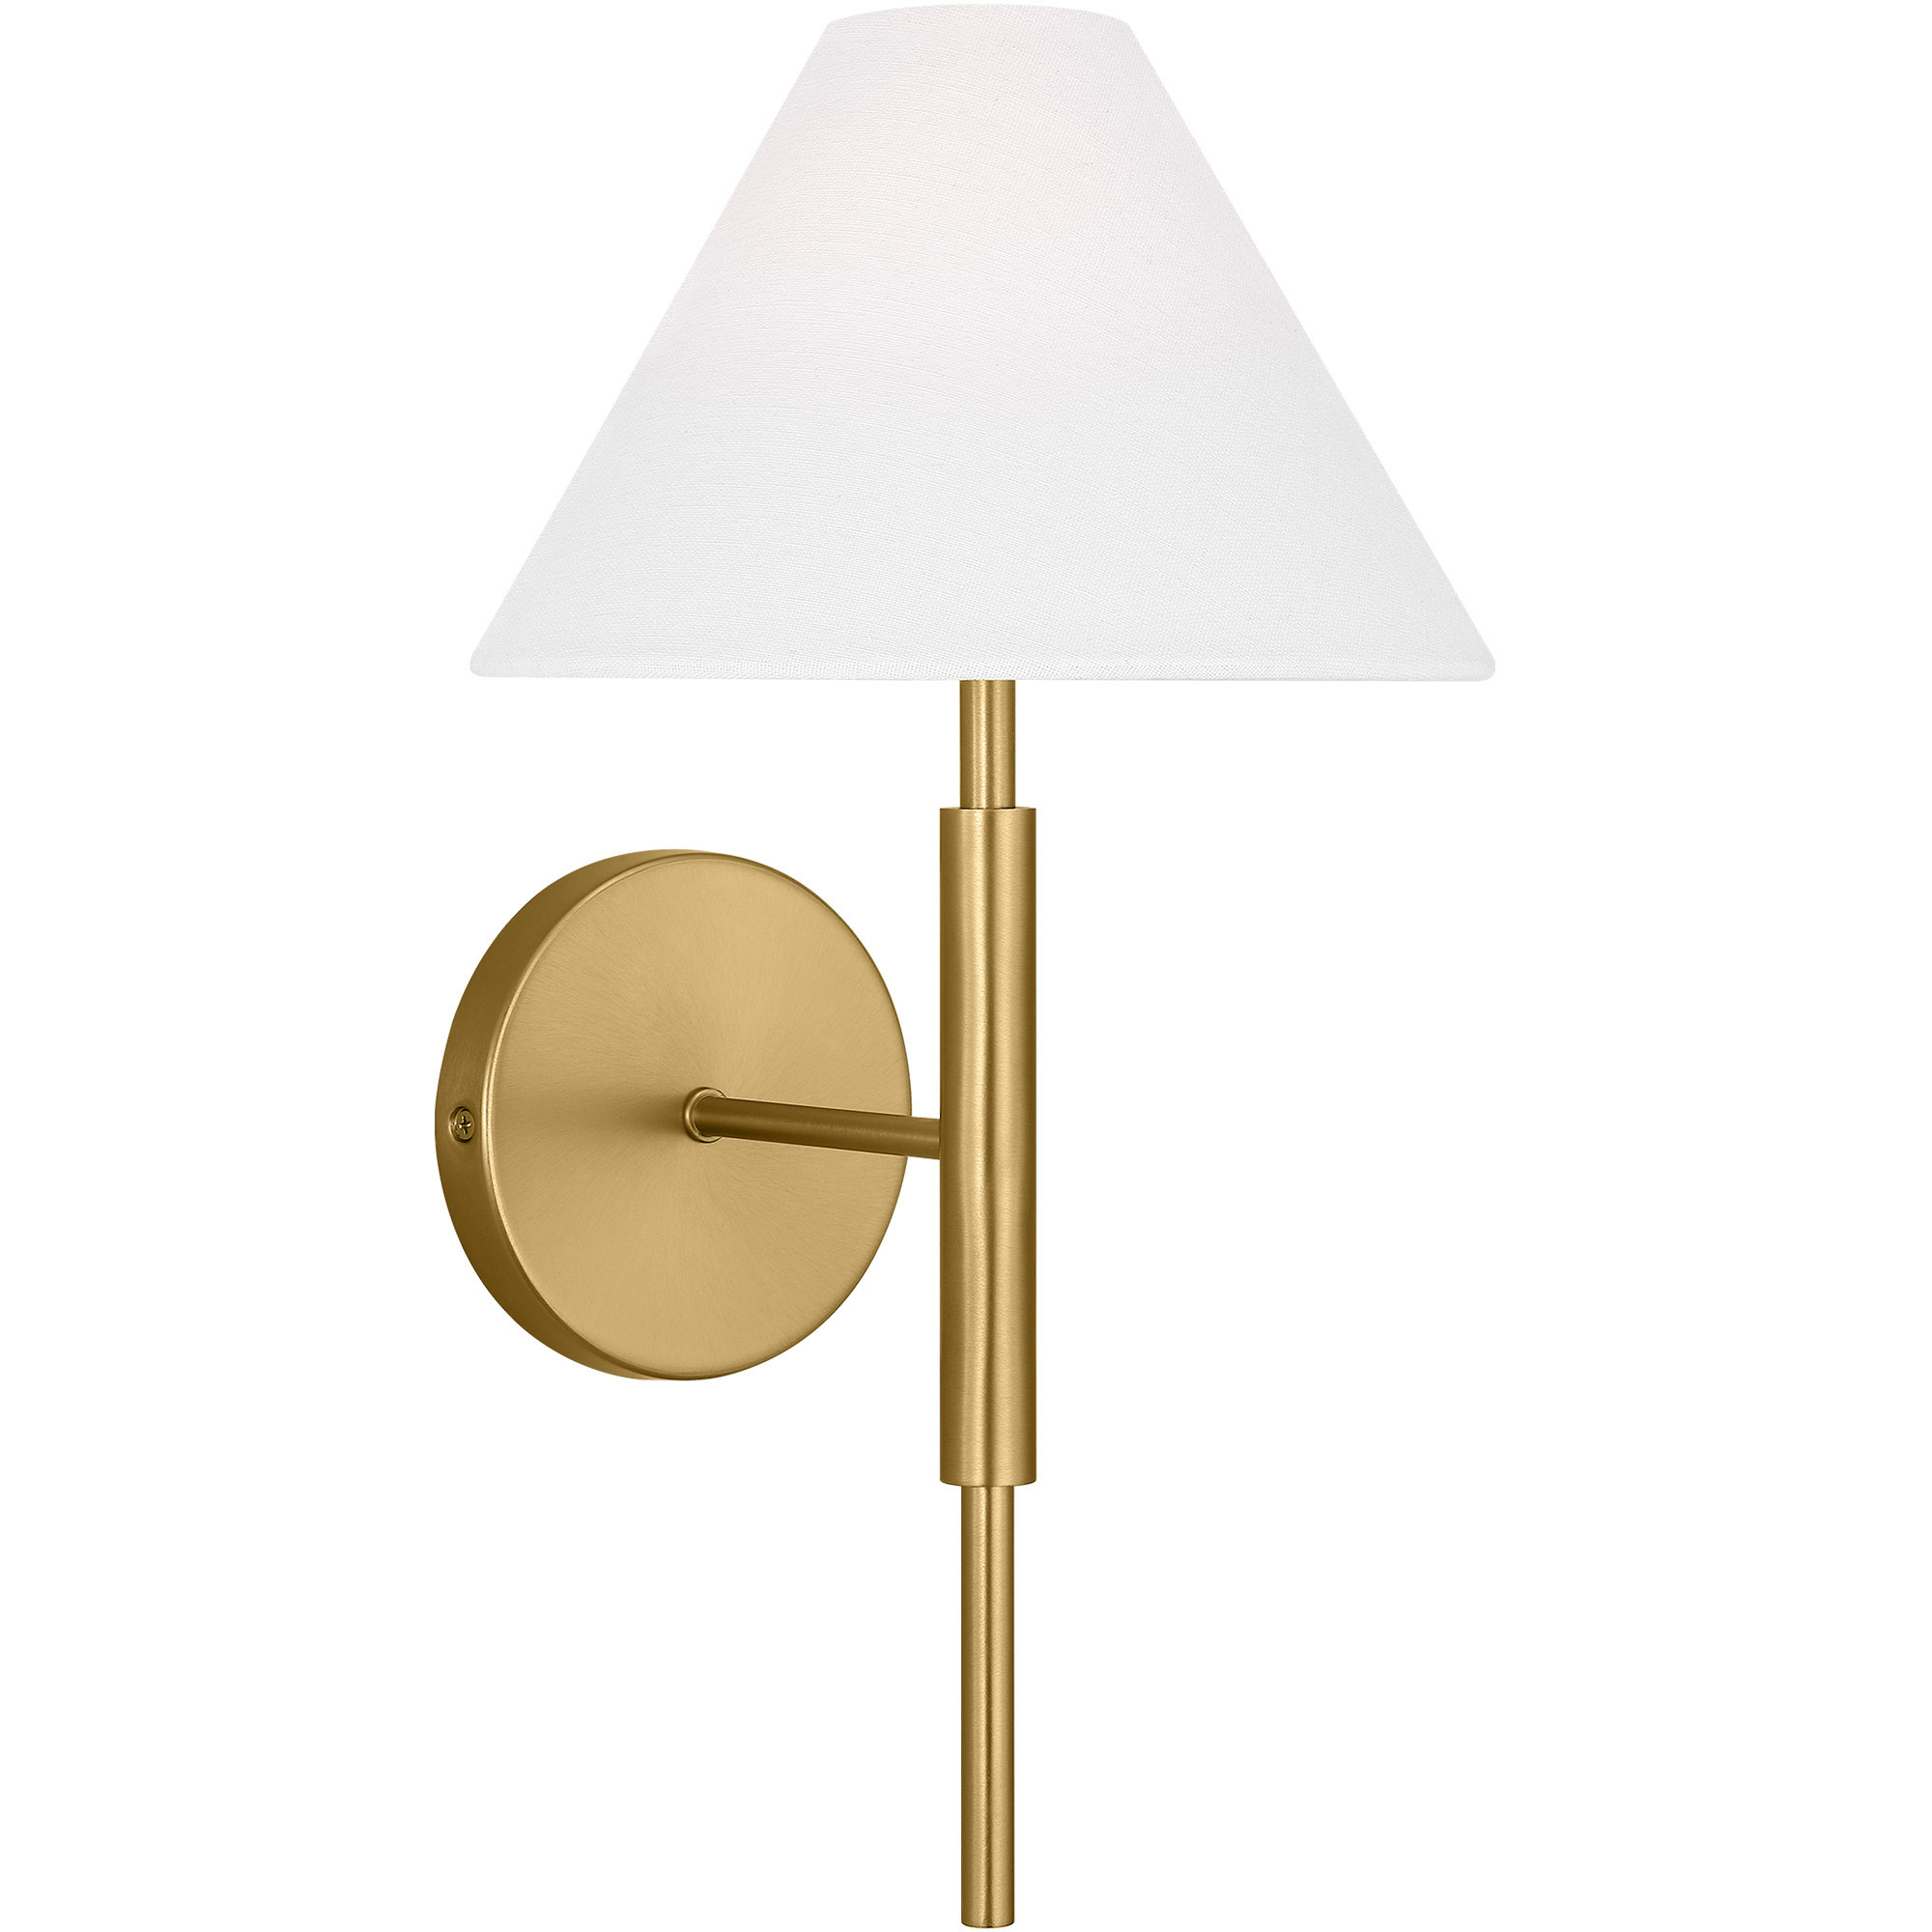 Porteau Wall Sconce by Visual Comfort Studio